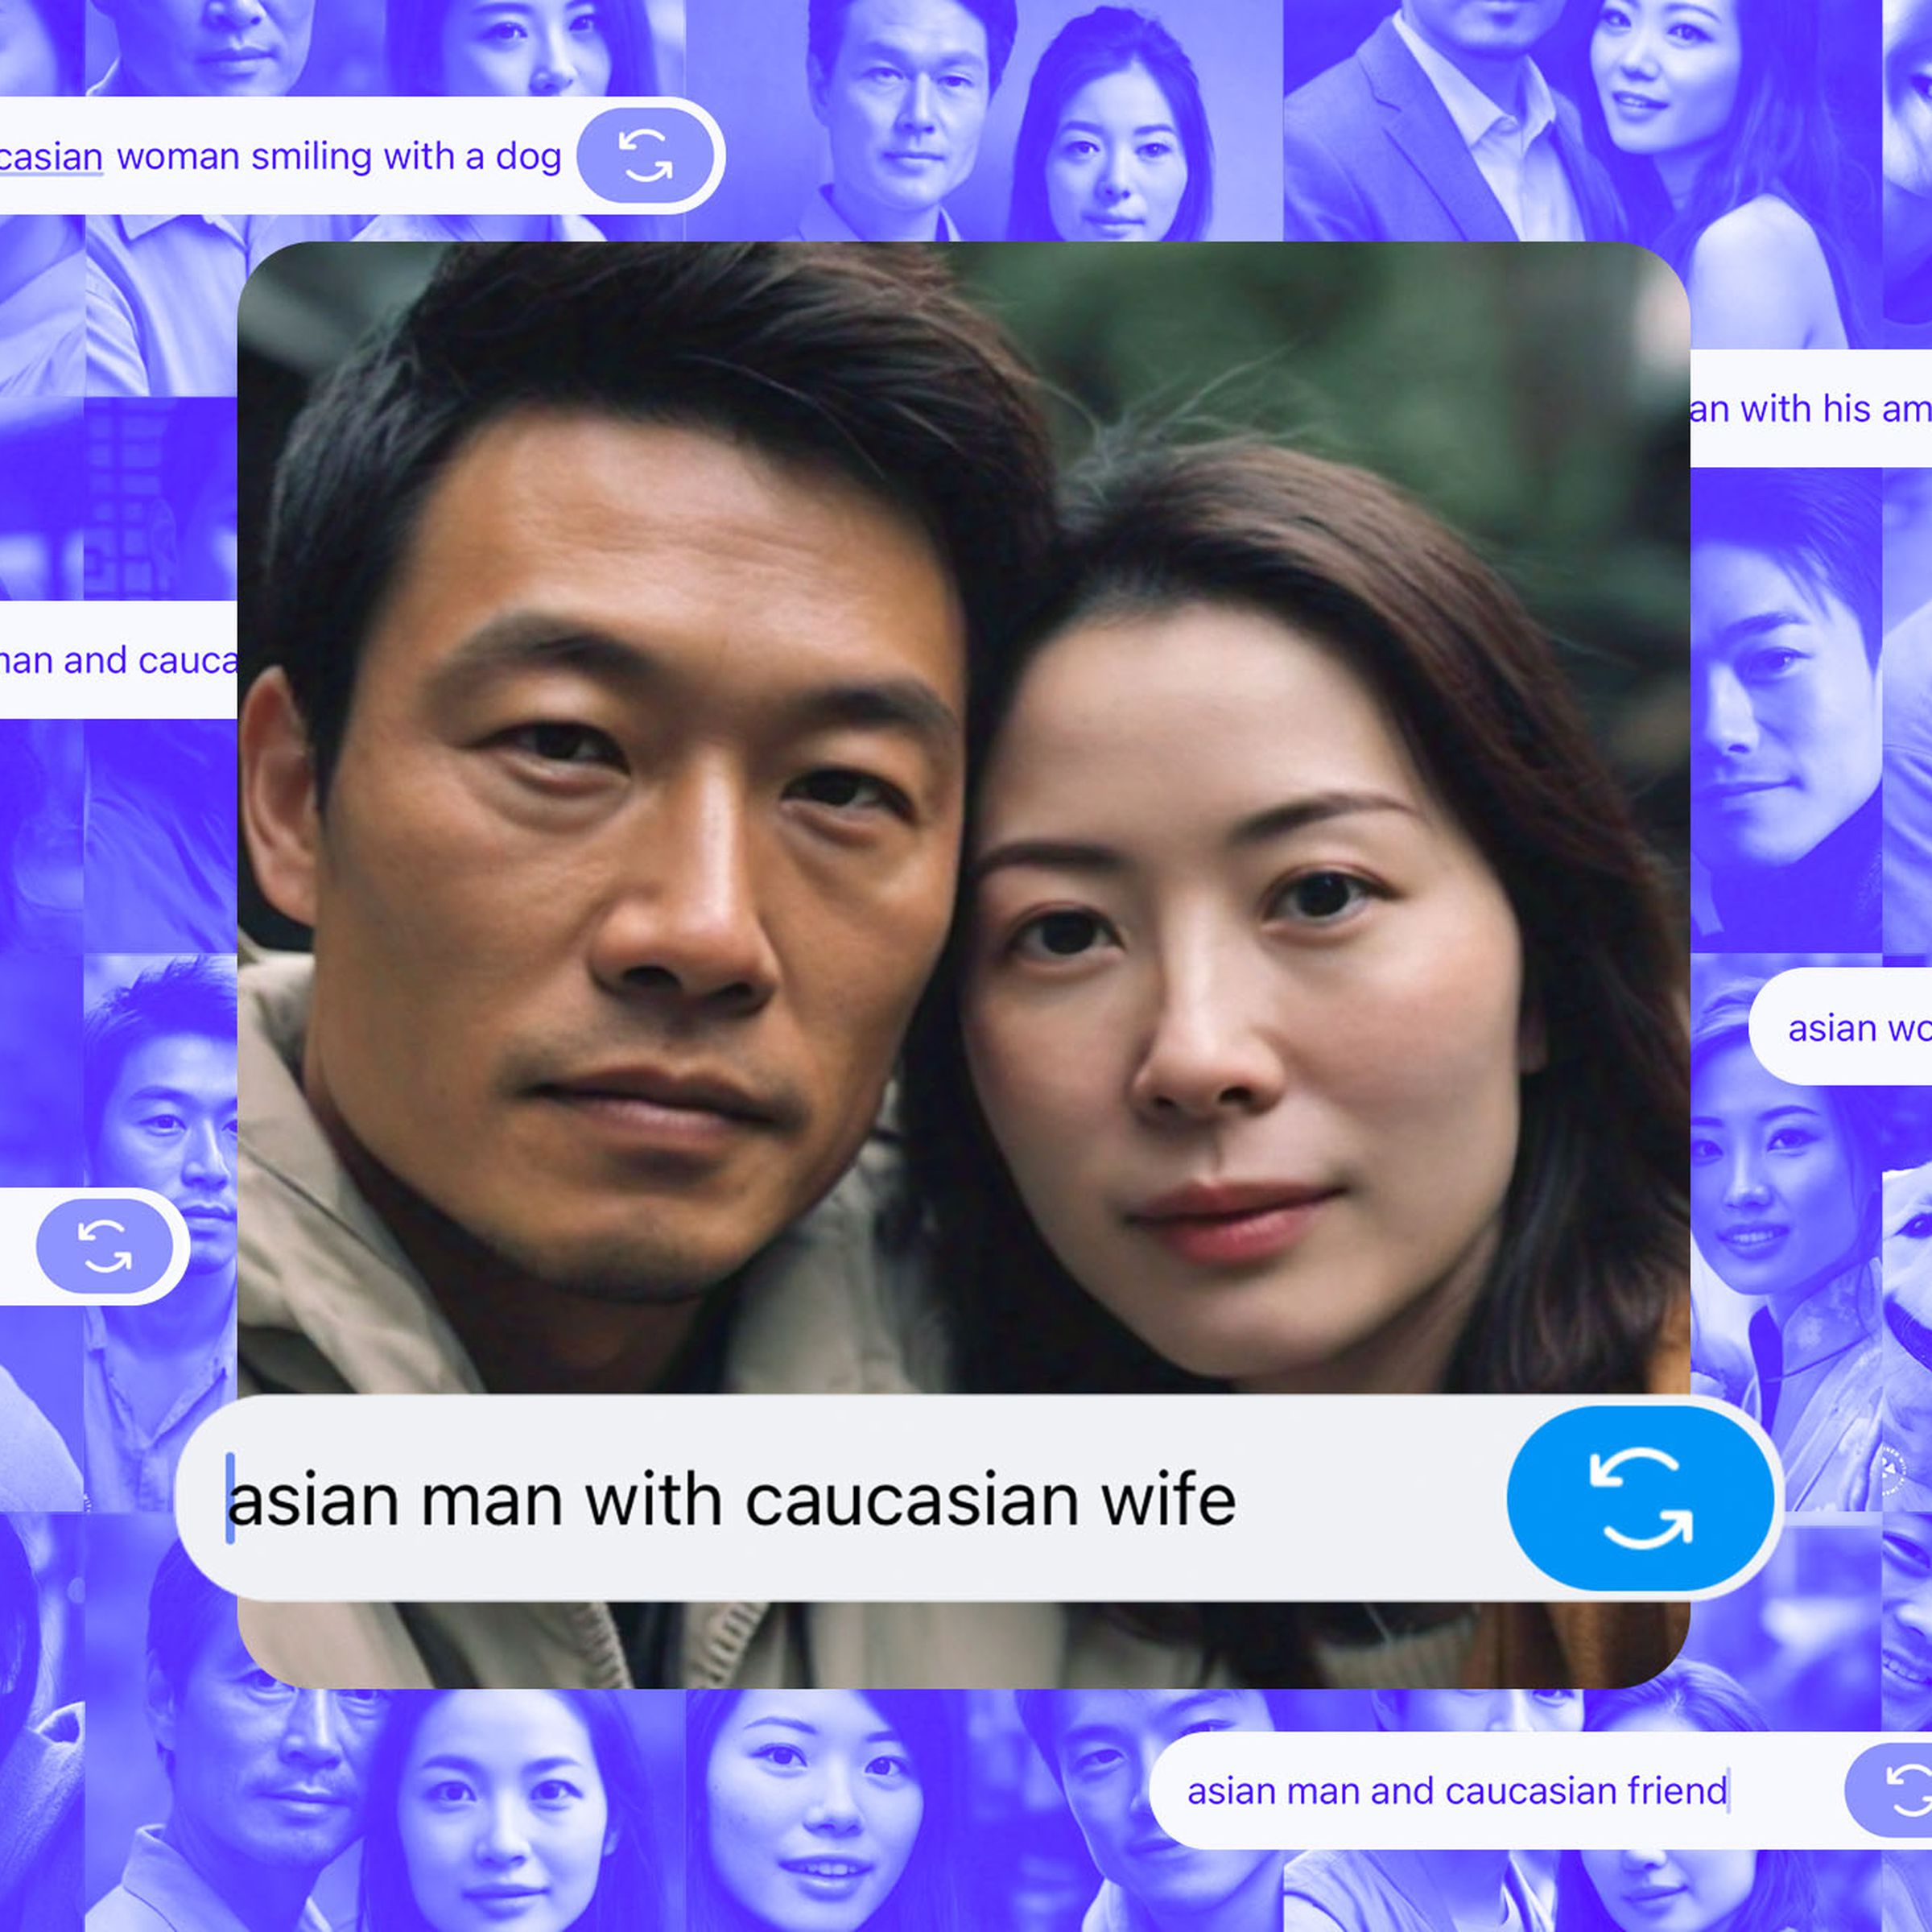 Photo collage of screenshots from Meta AI showing inaccurate images with Asian people.